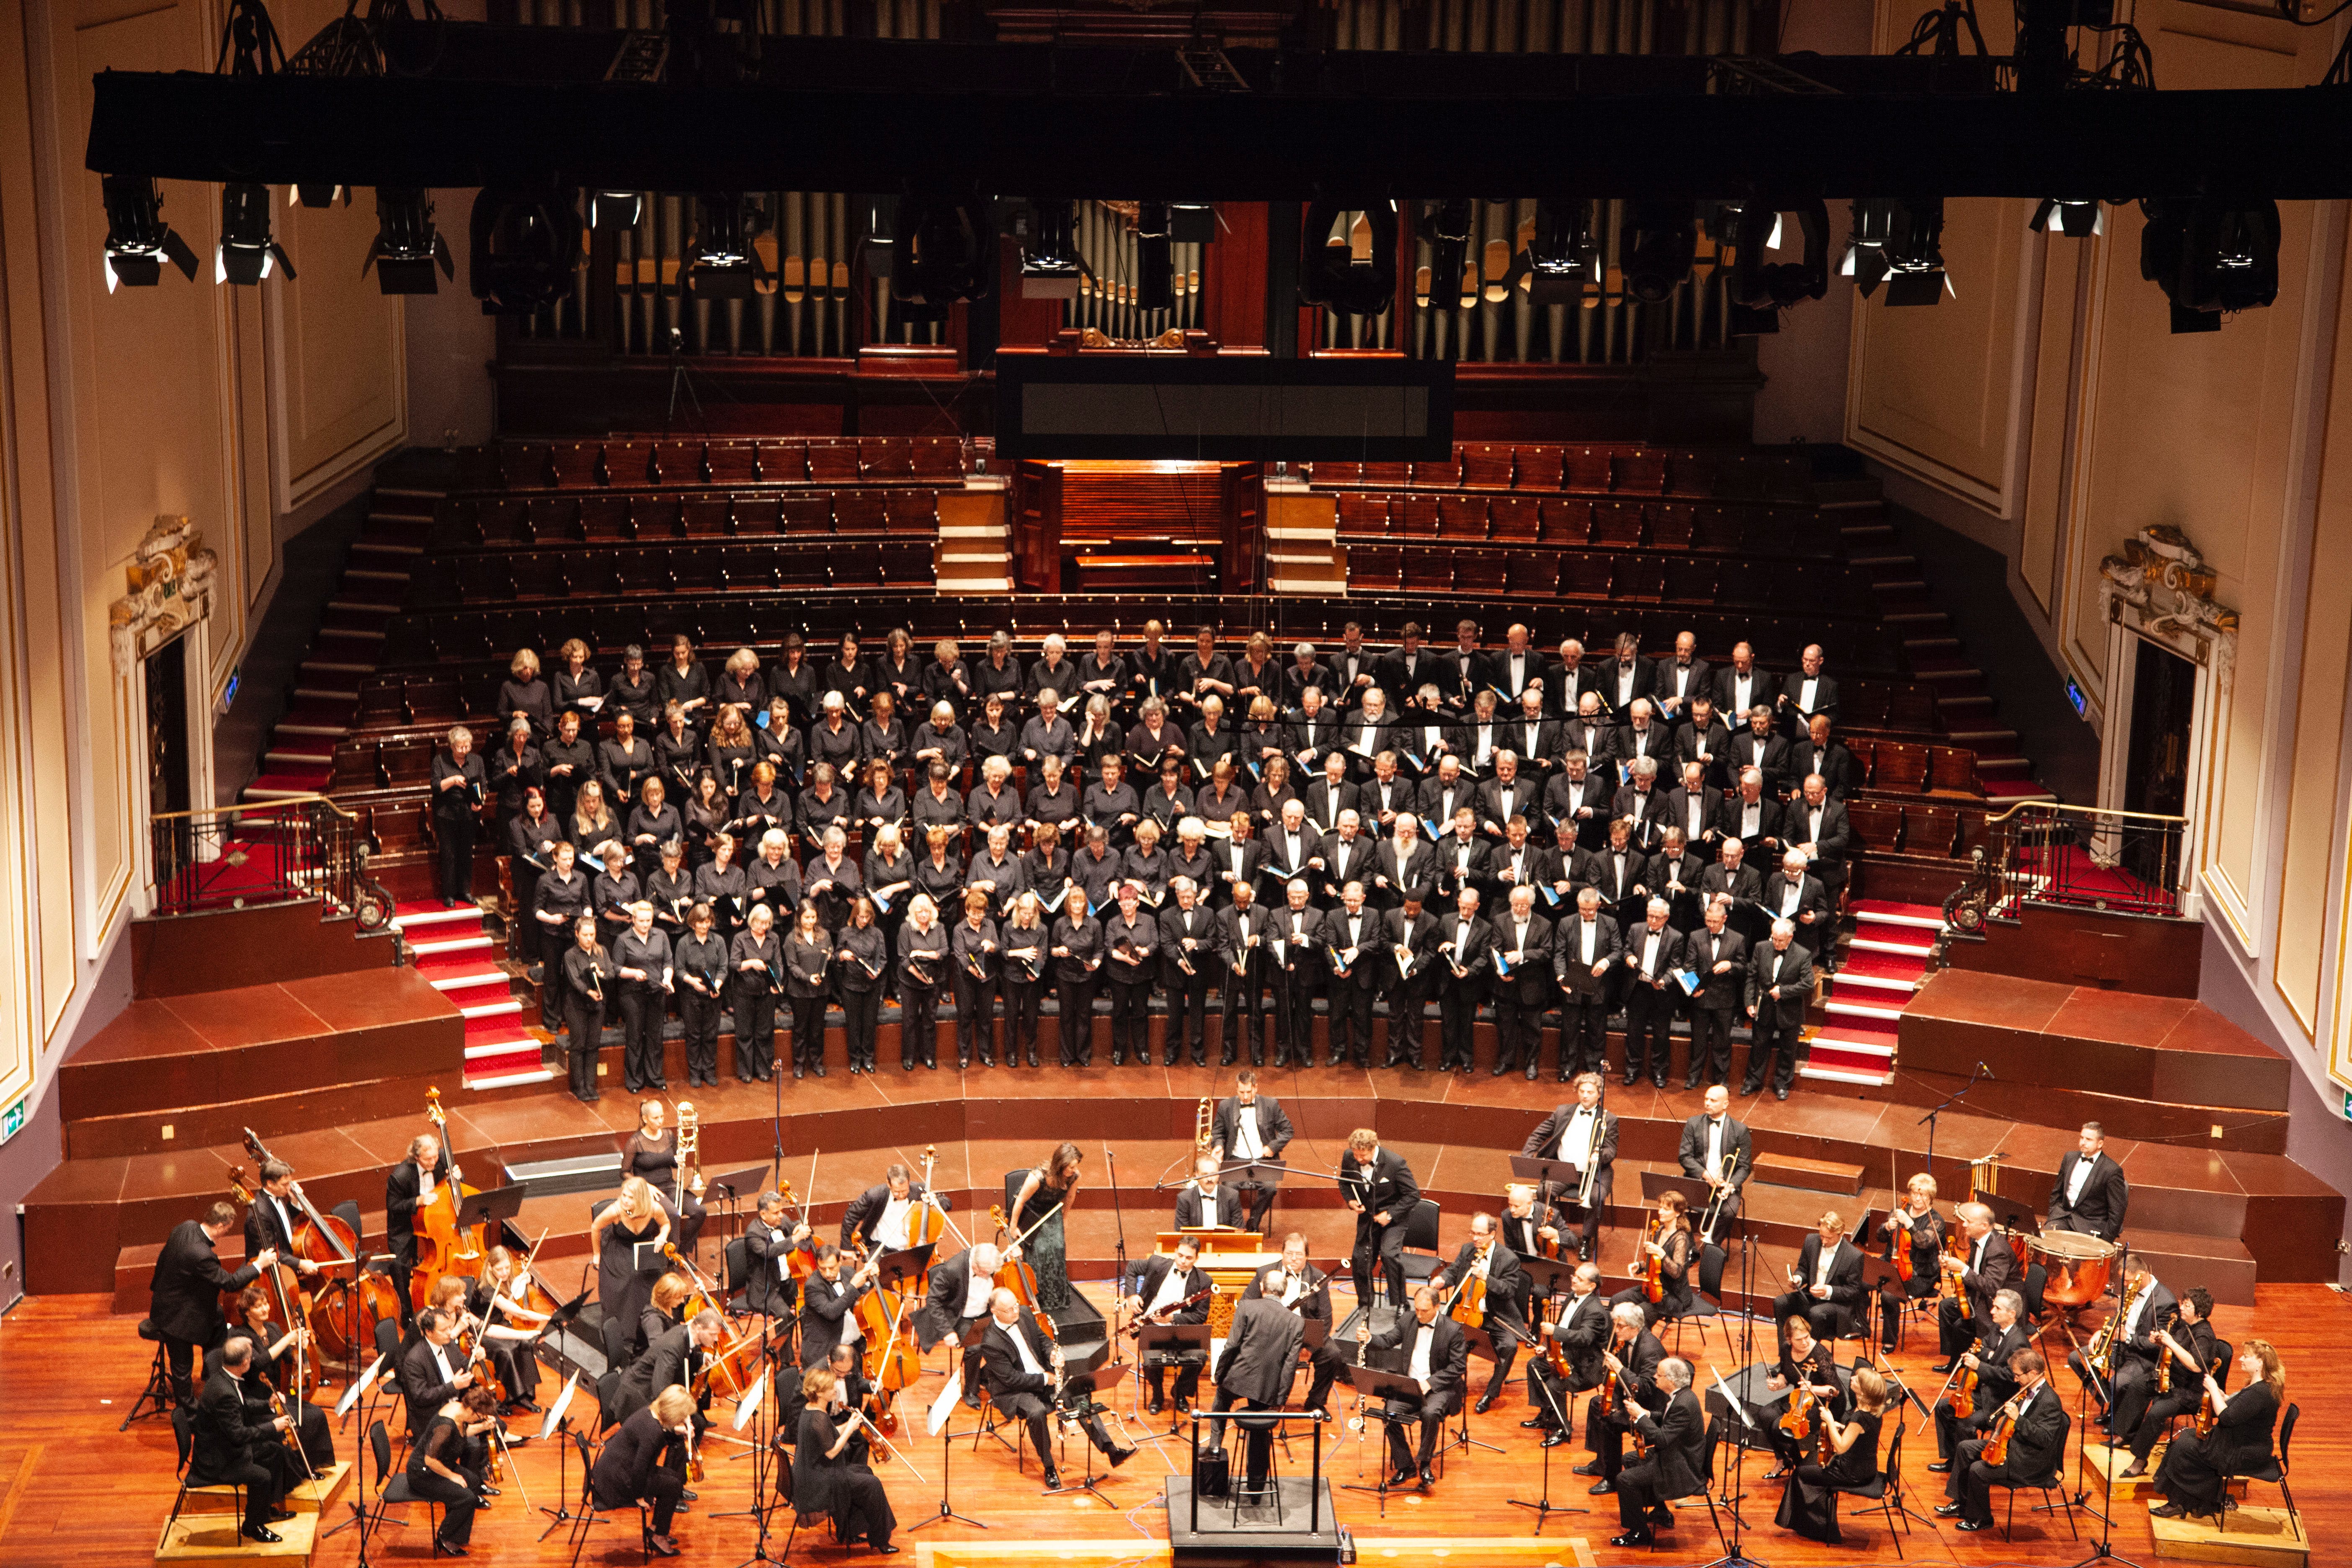 The Philharmonic Orchestra performing a concert, view from the stalls.